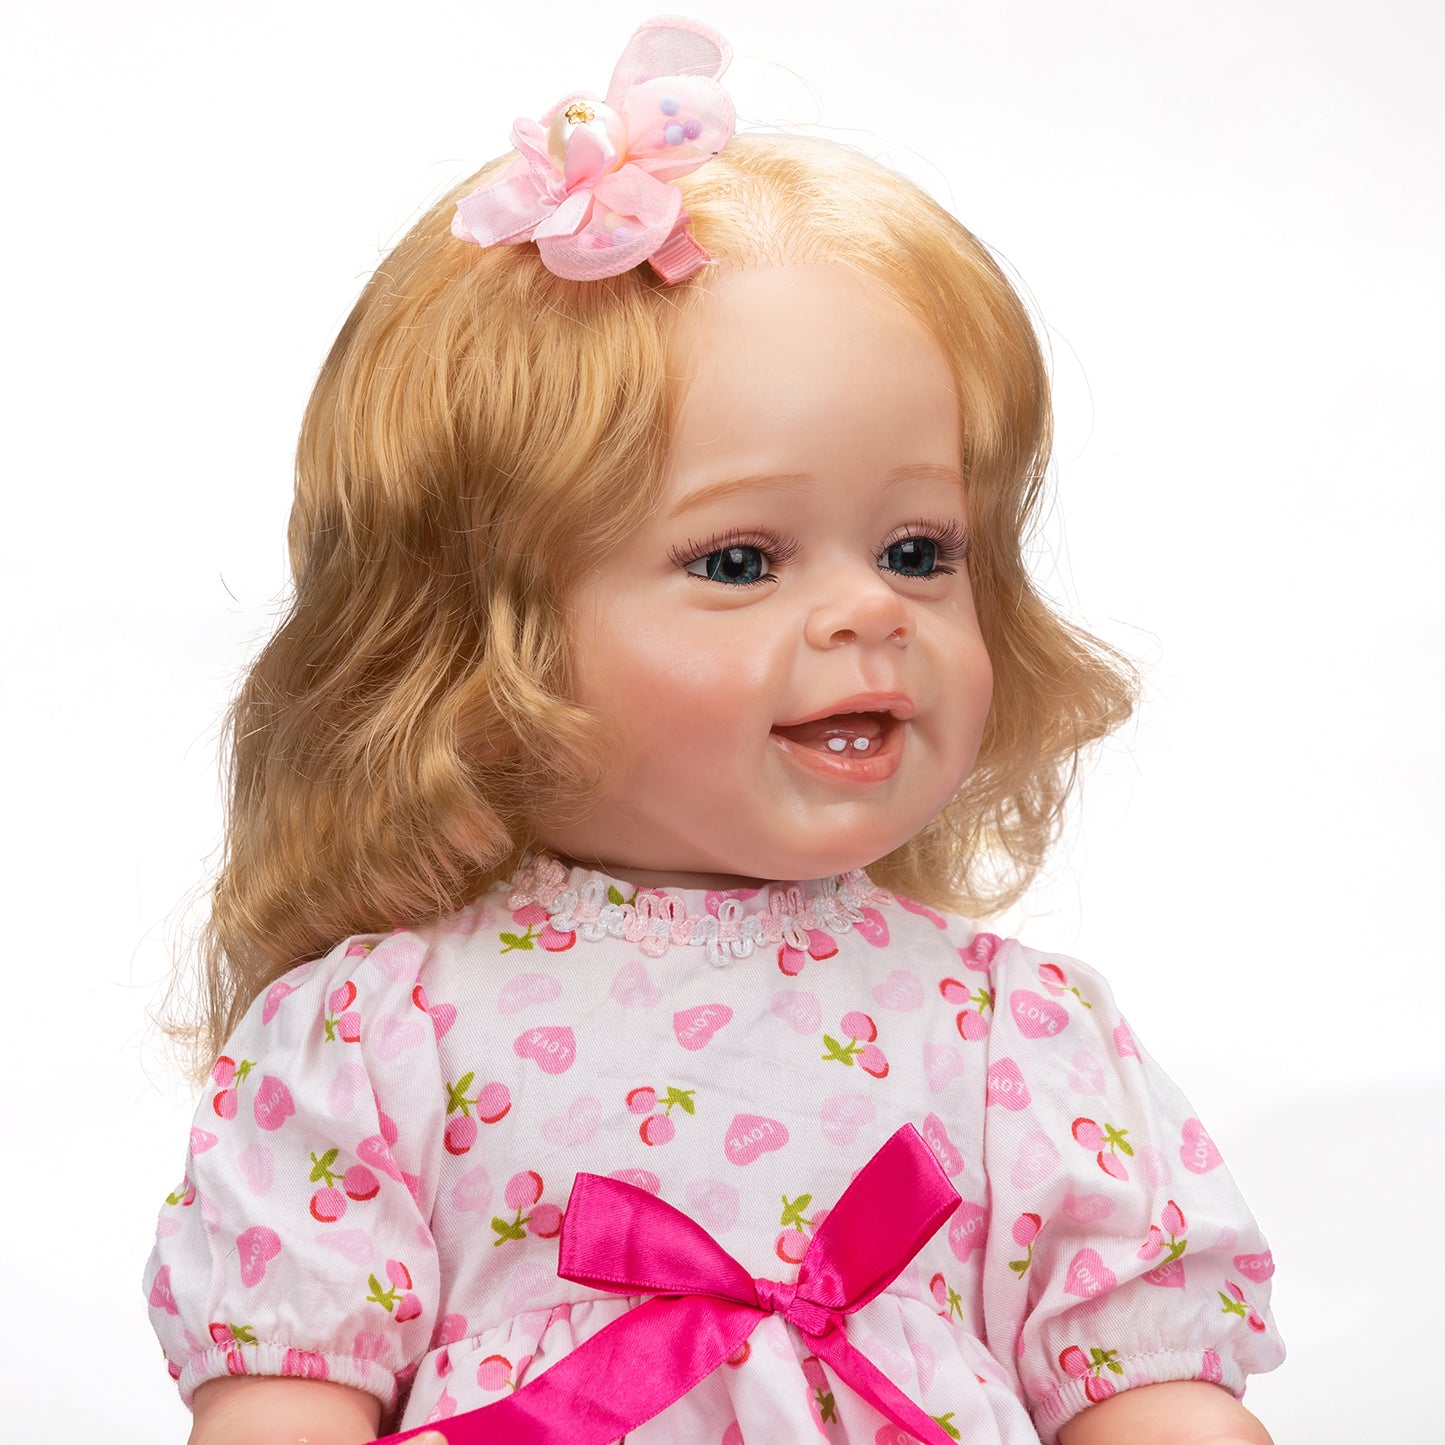 55cm | reborn baby dolls full body silicone lifelike baby dolls | reborn baby dolls | realistic baby dolls| newborn baby dolls | real life baby dolls | rebron baby dolls toddler | lifelike toddler dolls | therapy dolls for adults | anatomically correct baby girl doll | infant baby doll | gift for kids ages 3+ girl | weighted cloth body | birthday gift | collection | girl | boys |  mother | daughter | granddaughter | sleeping |real look real baby dolls that look real looking | reborn toddler dolls | mnmj